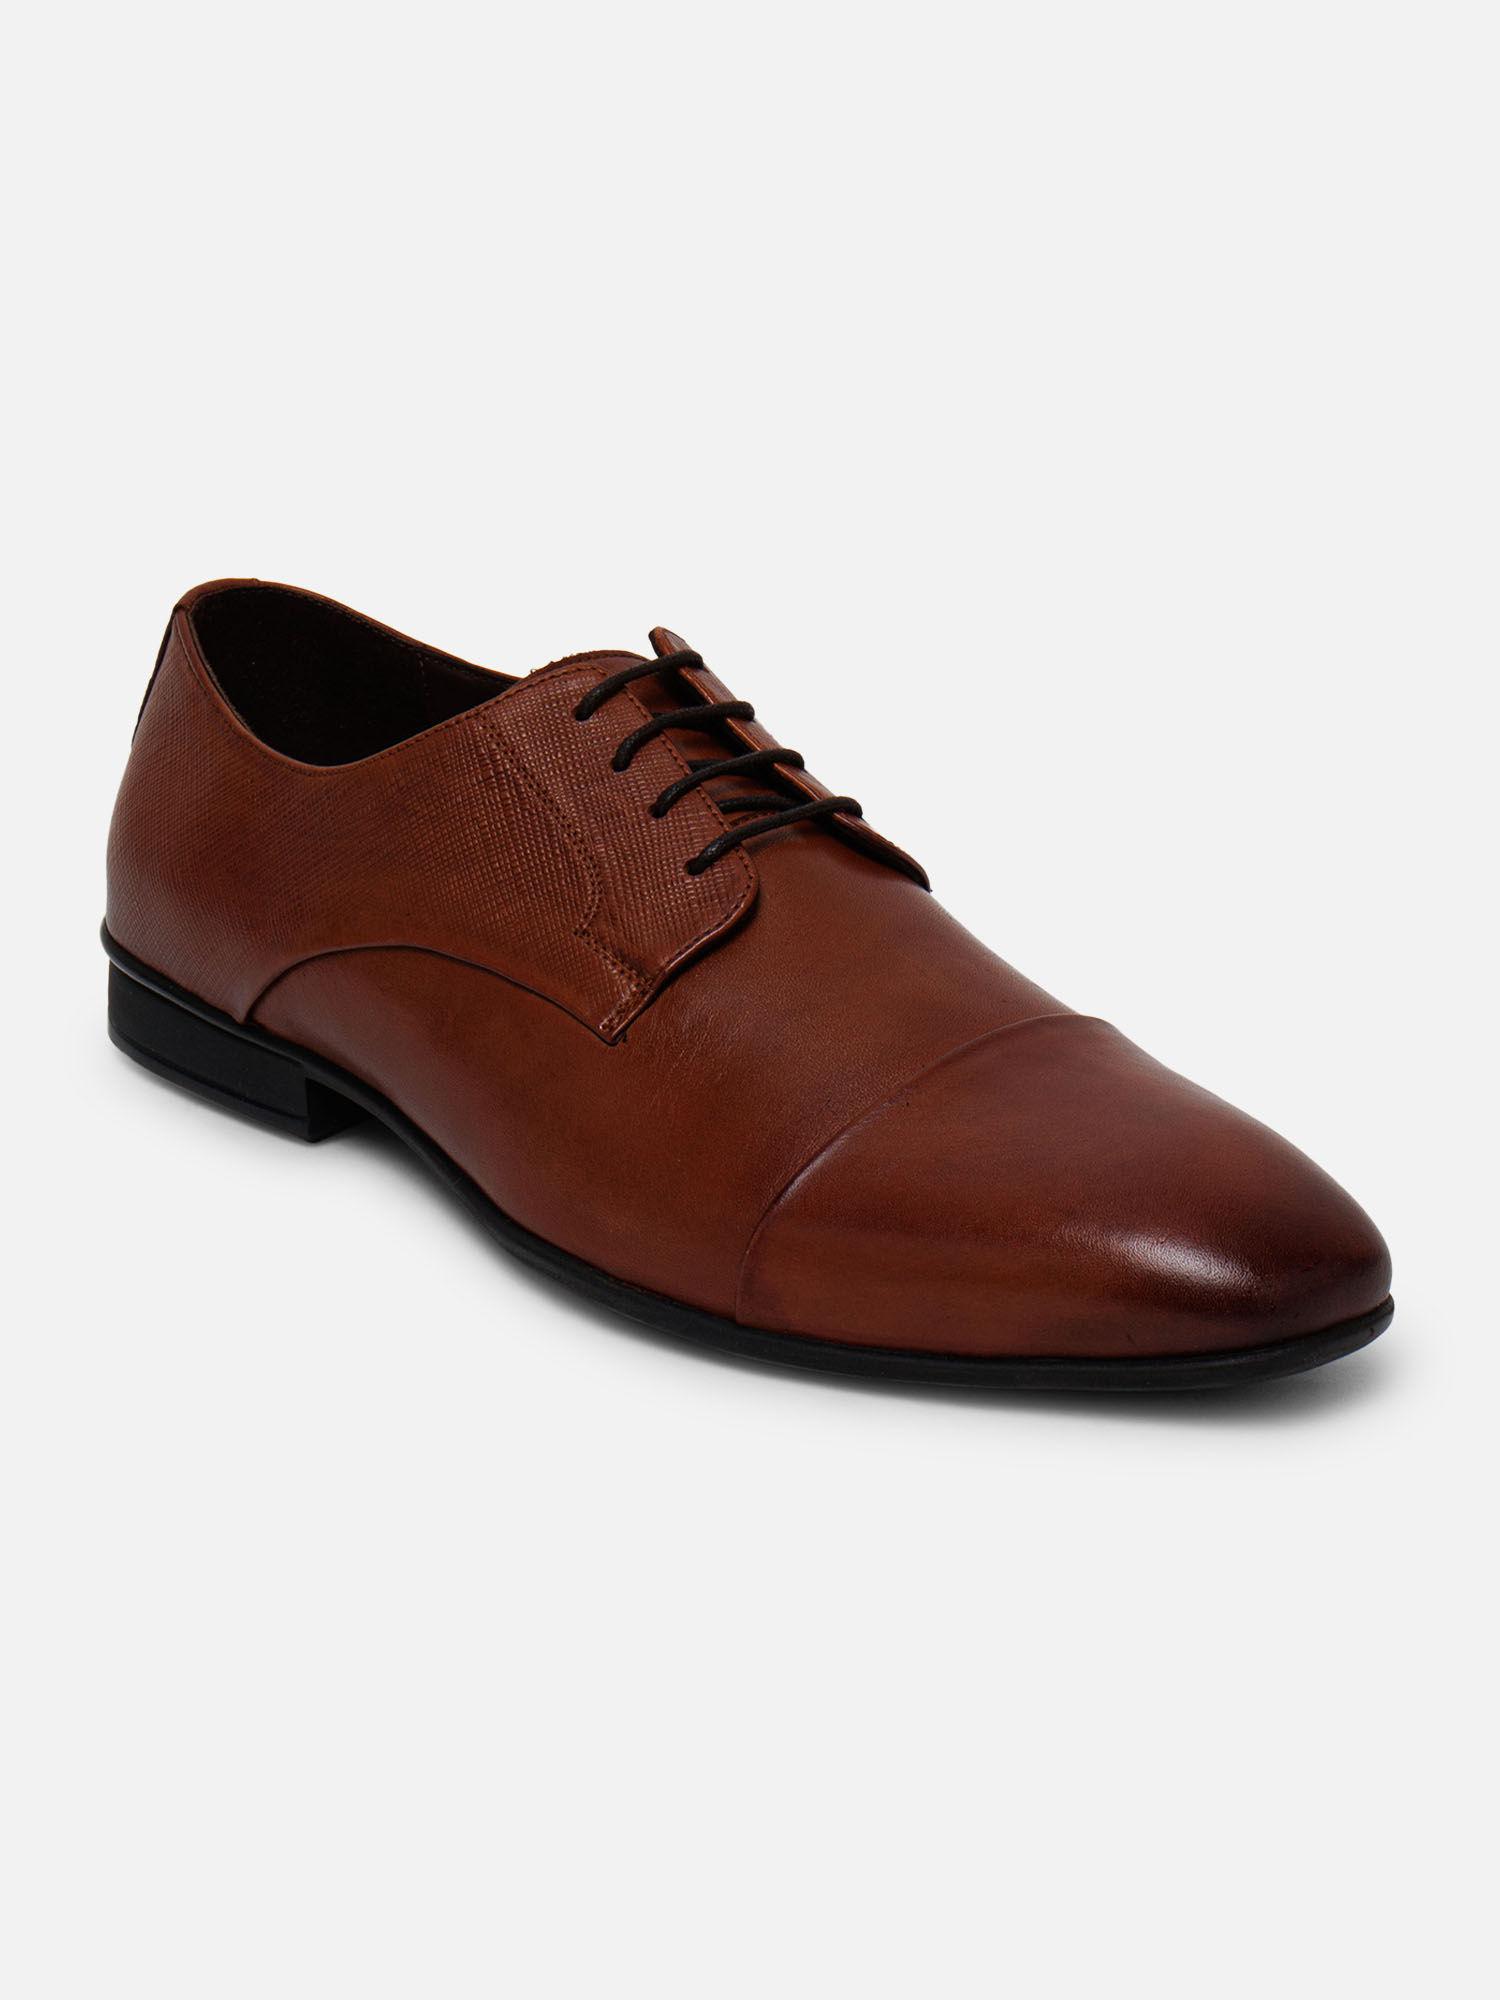 mens casual lace-ups oxfords formal shoes brown